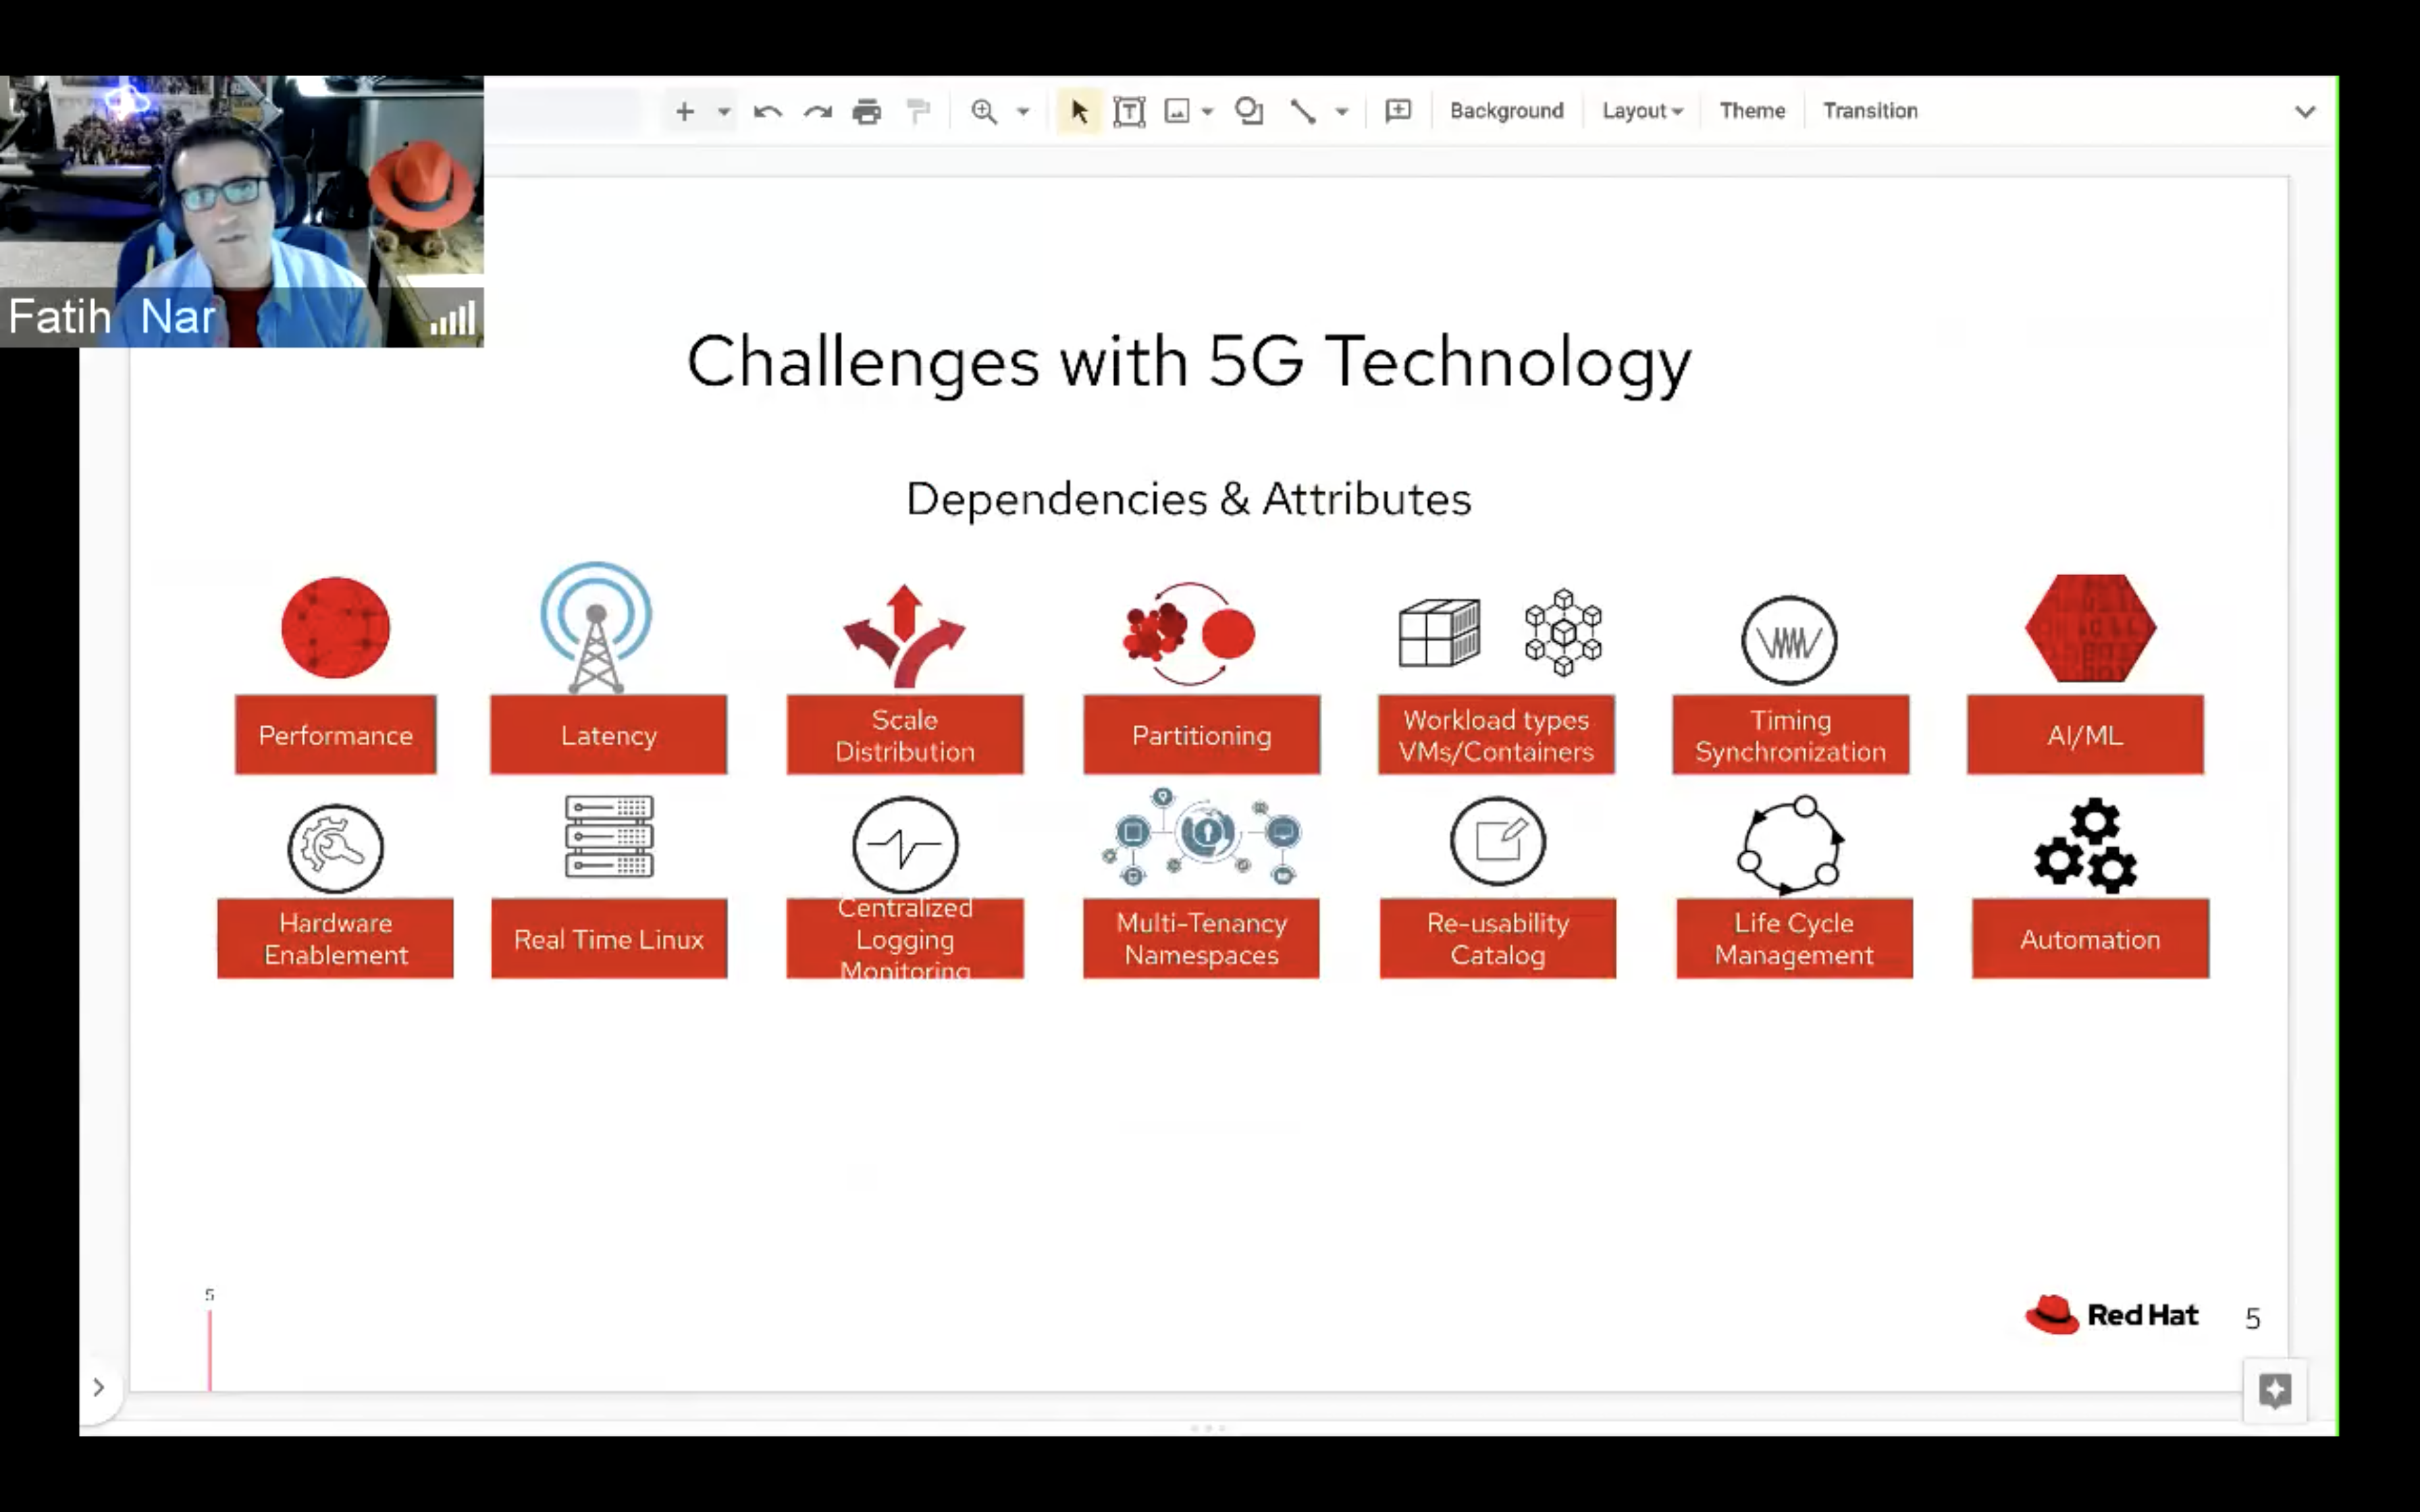 Challenges with 5G Technology